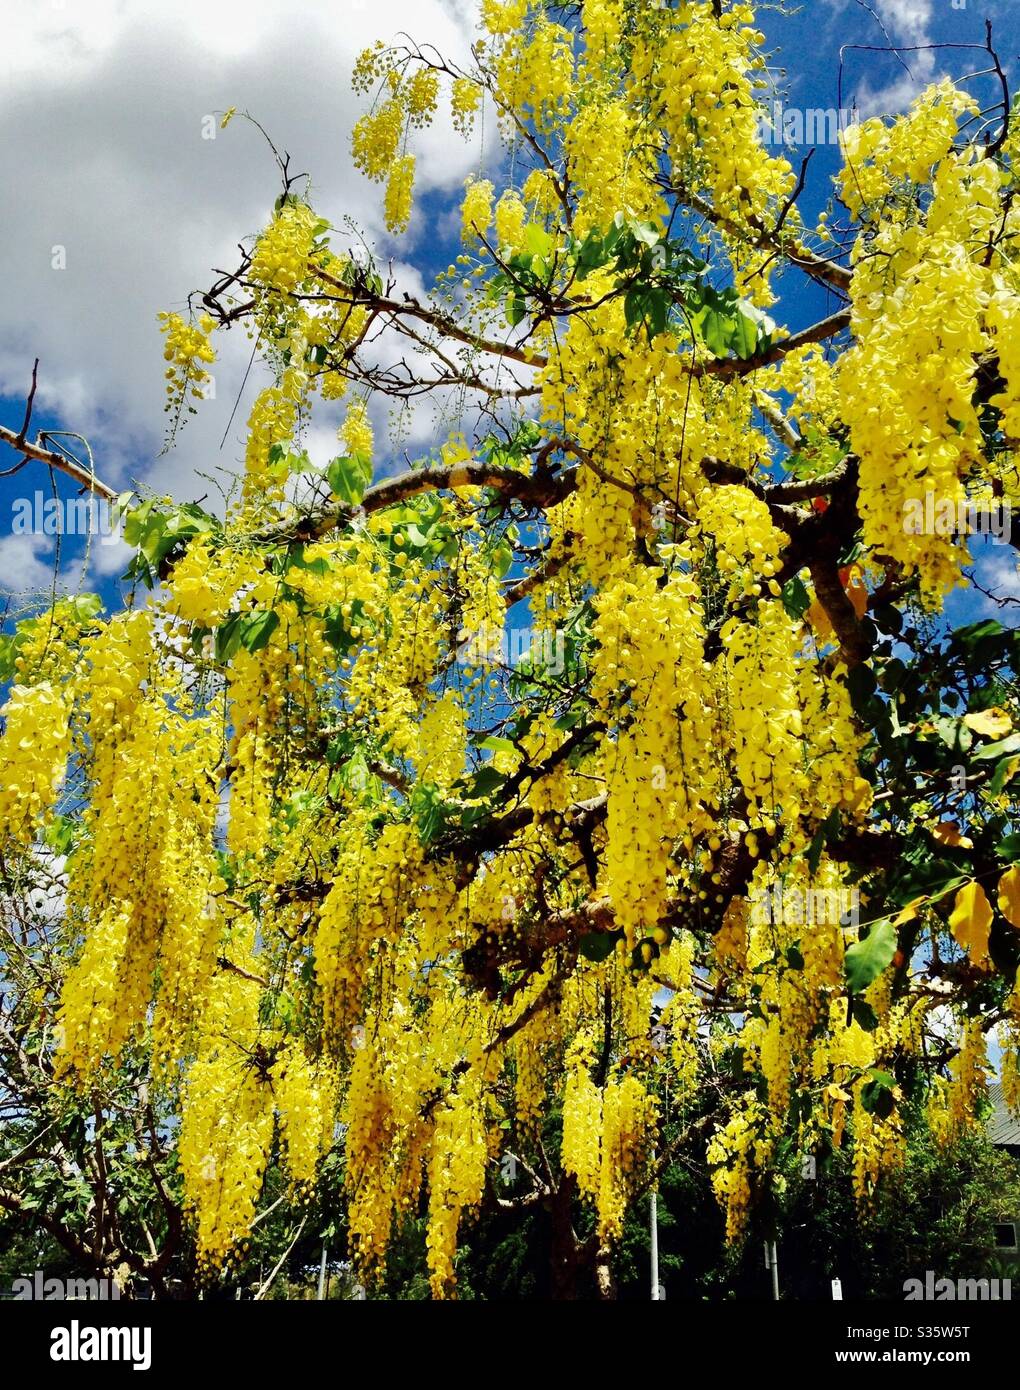 Golden chain tree in bloom Stock Photo - Alamy